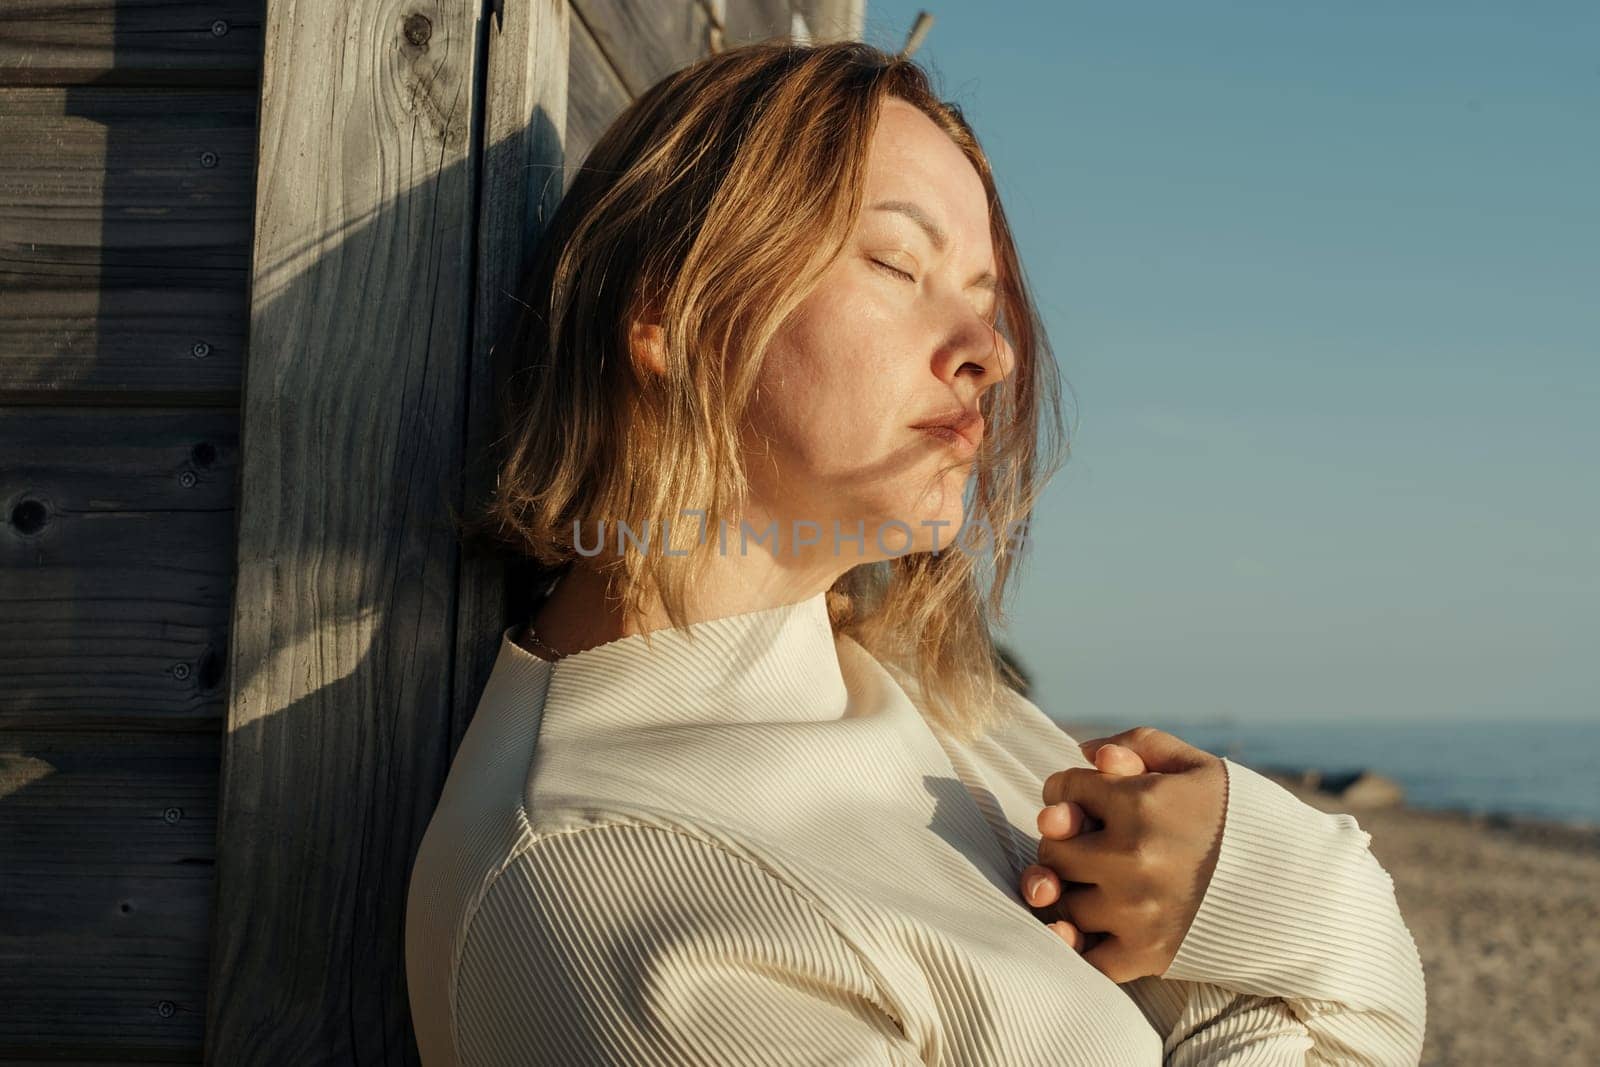 A woman leans casually against a weathered wooden wall near the ocean, gazing out at the waves crashing on the shore.